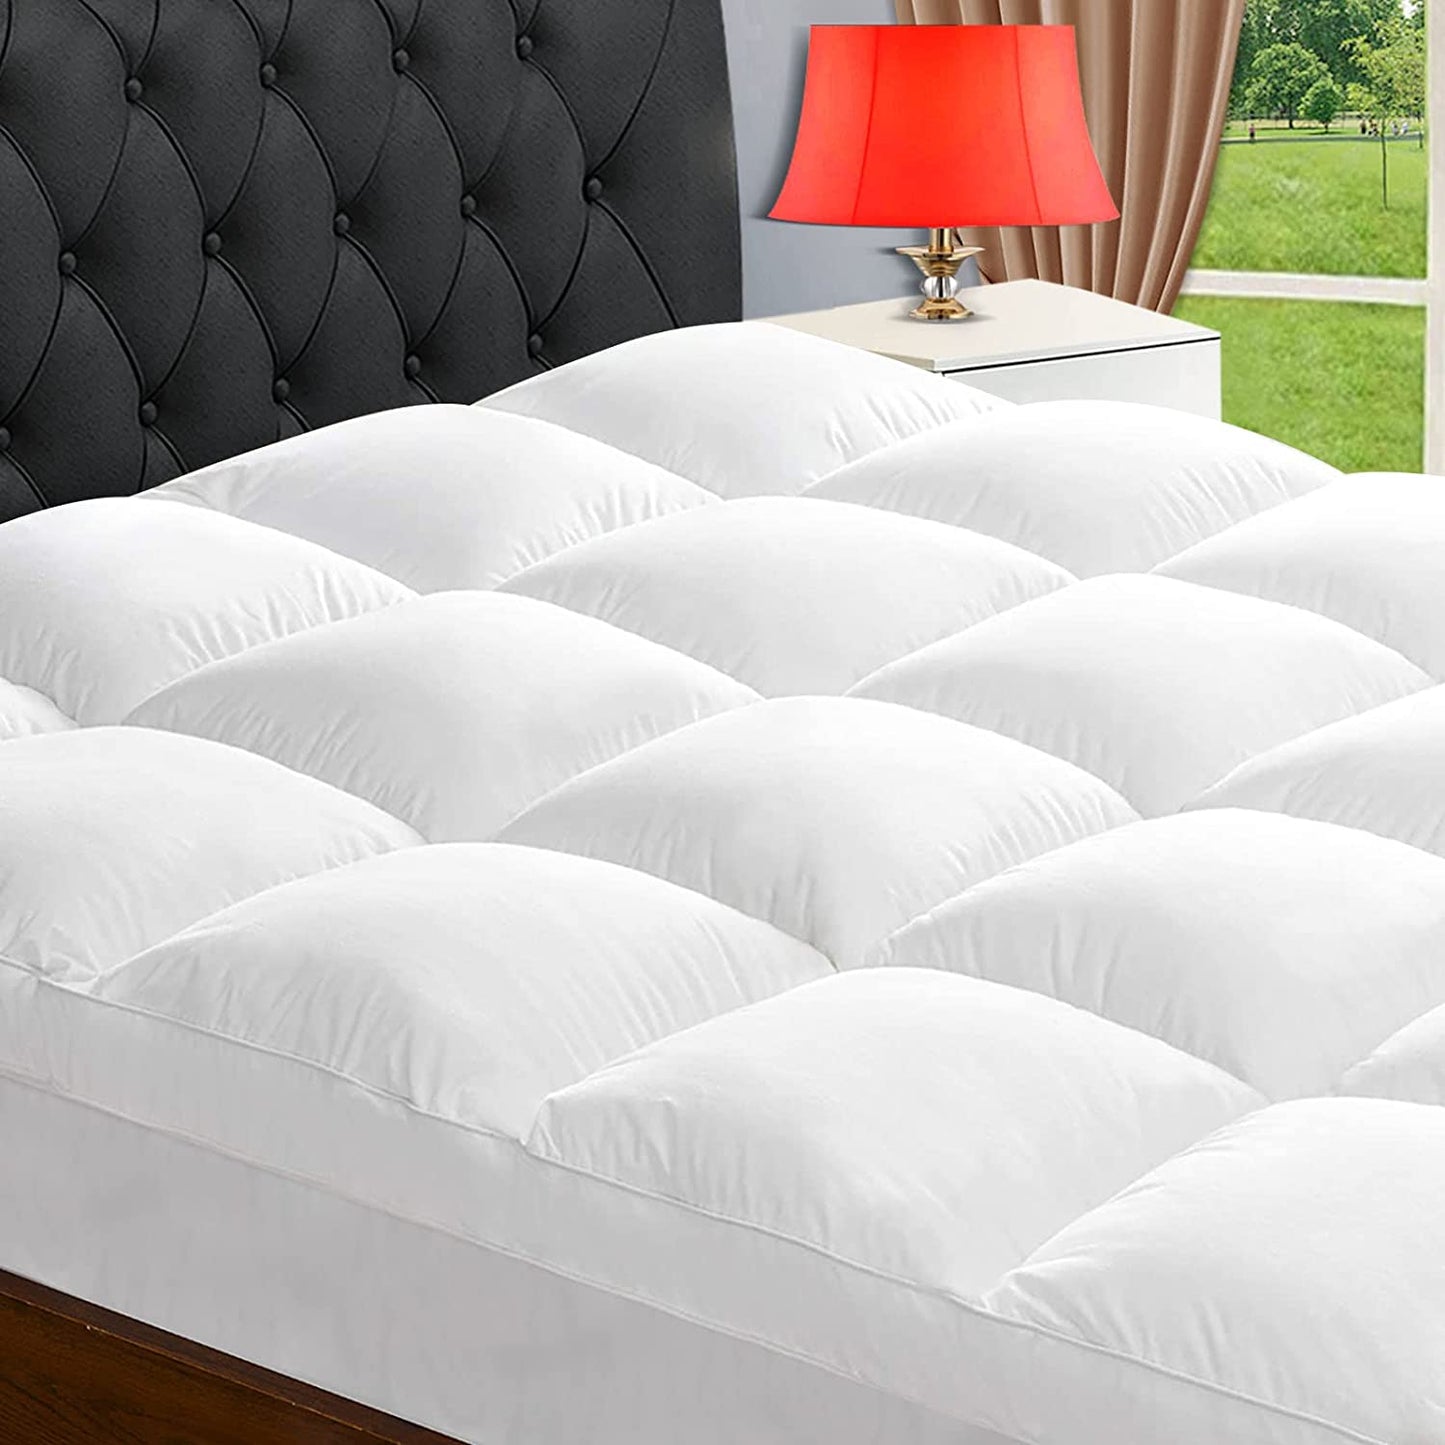 TEXARTIST King Mattress Pad Cooling Quilted Mattress Cover Cotton Pillow Top Mattress Protector Fitted 8-21” Deep Pocket Breathable Soft Mattress Topper